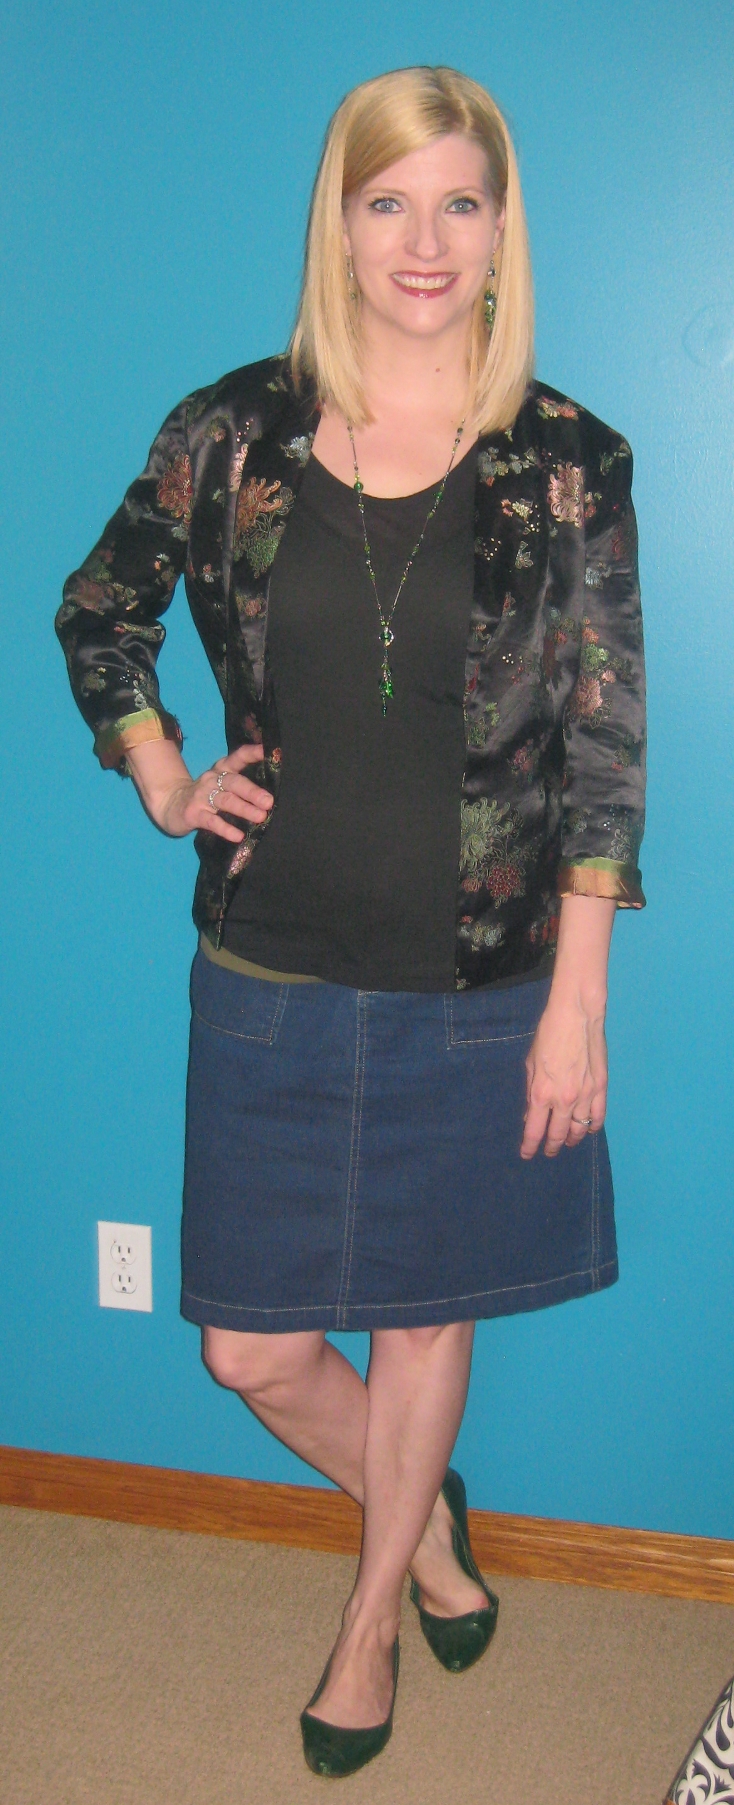 Levis denim skirt $2.50 and green pointy flats from my closet.